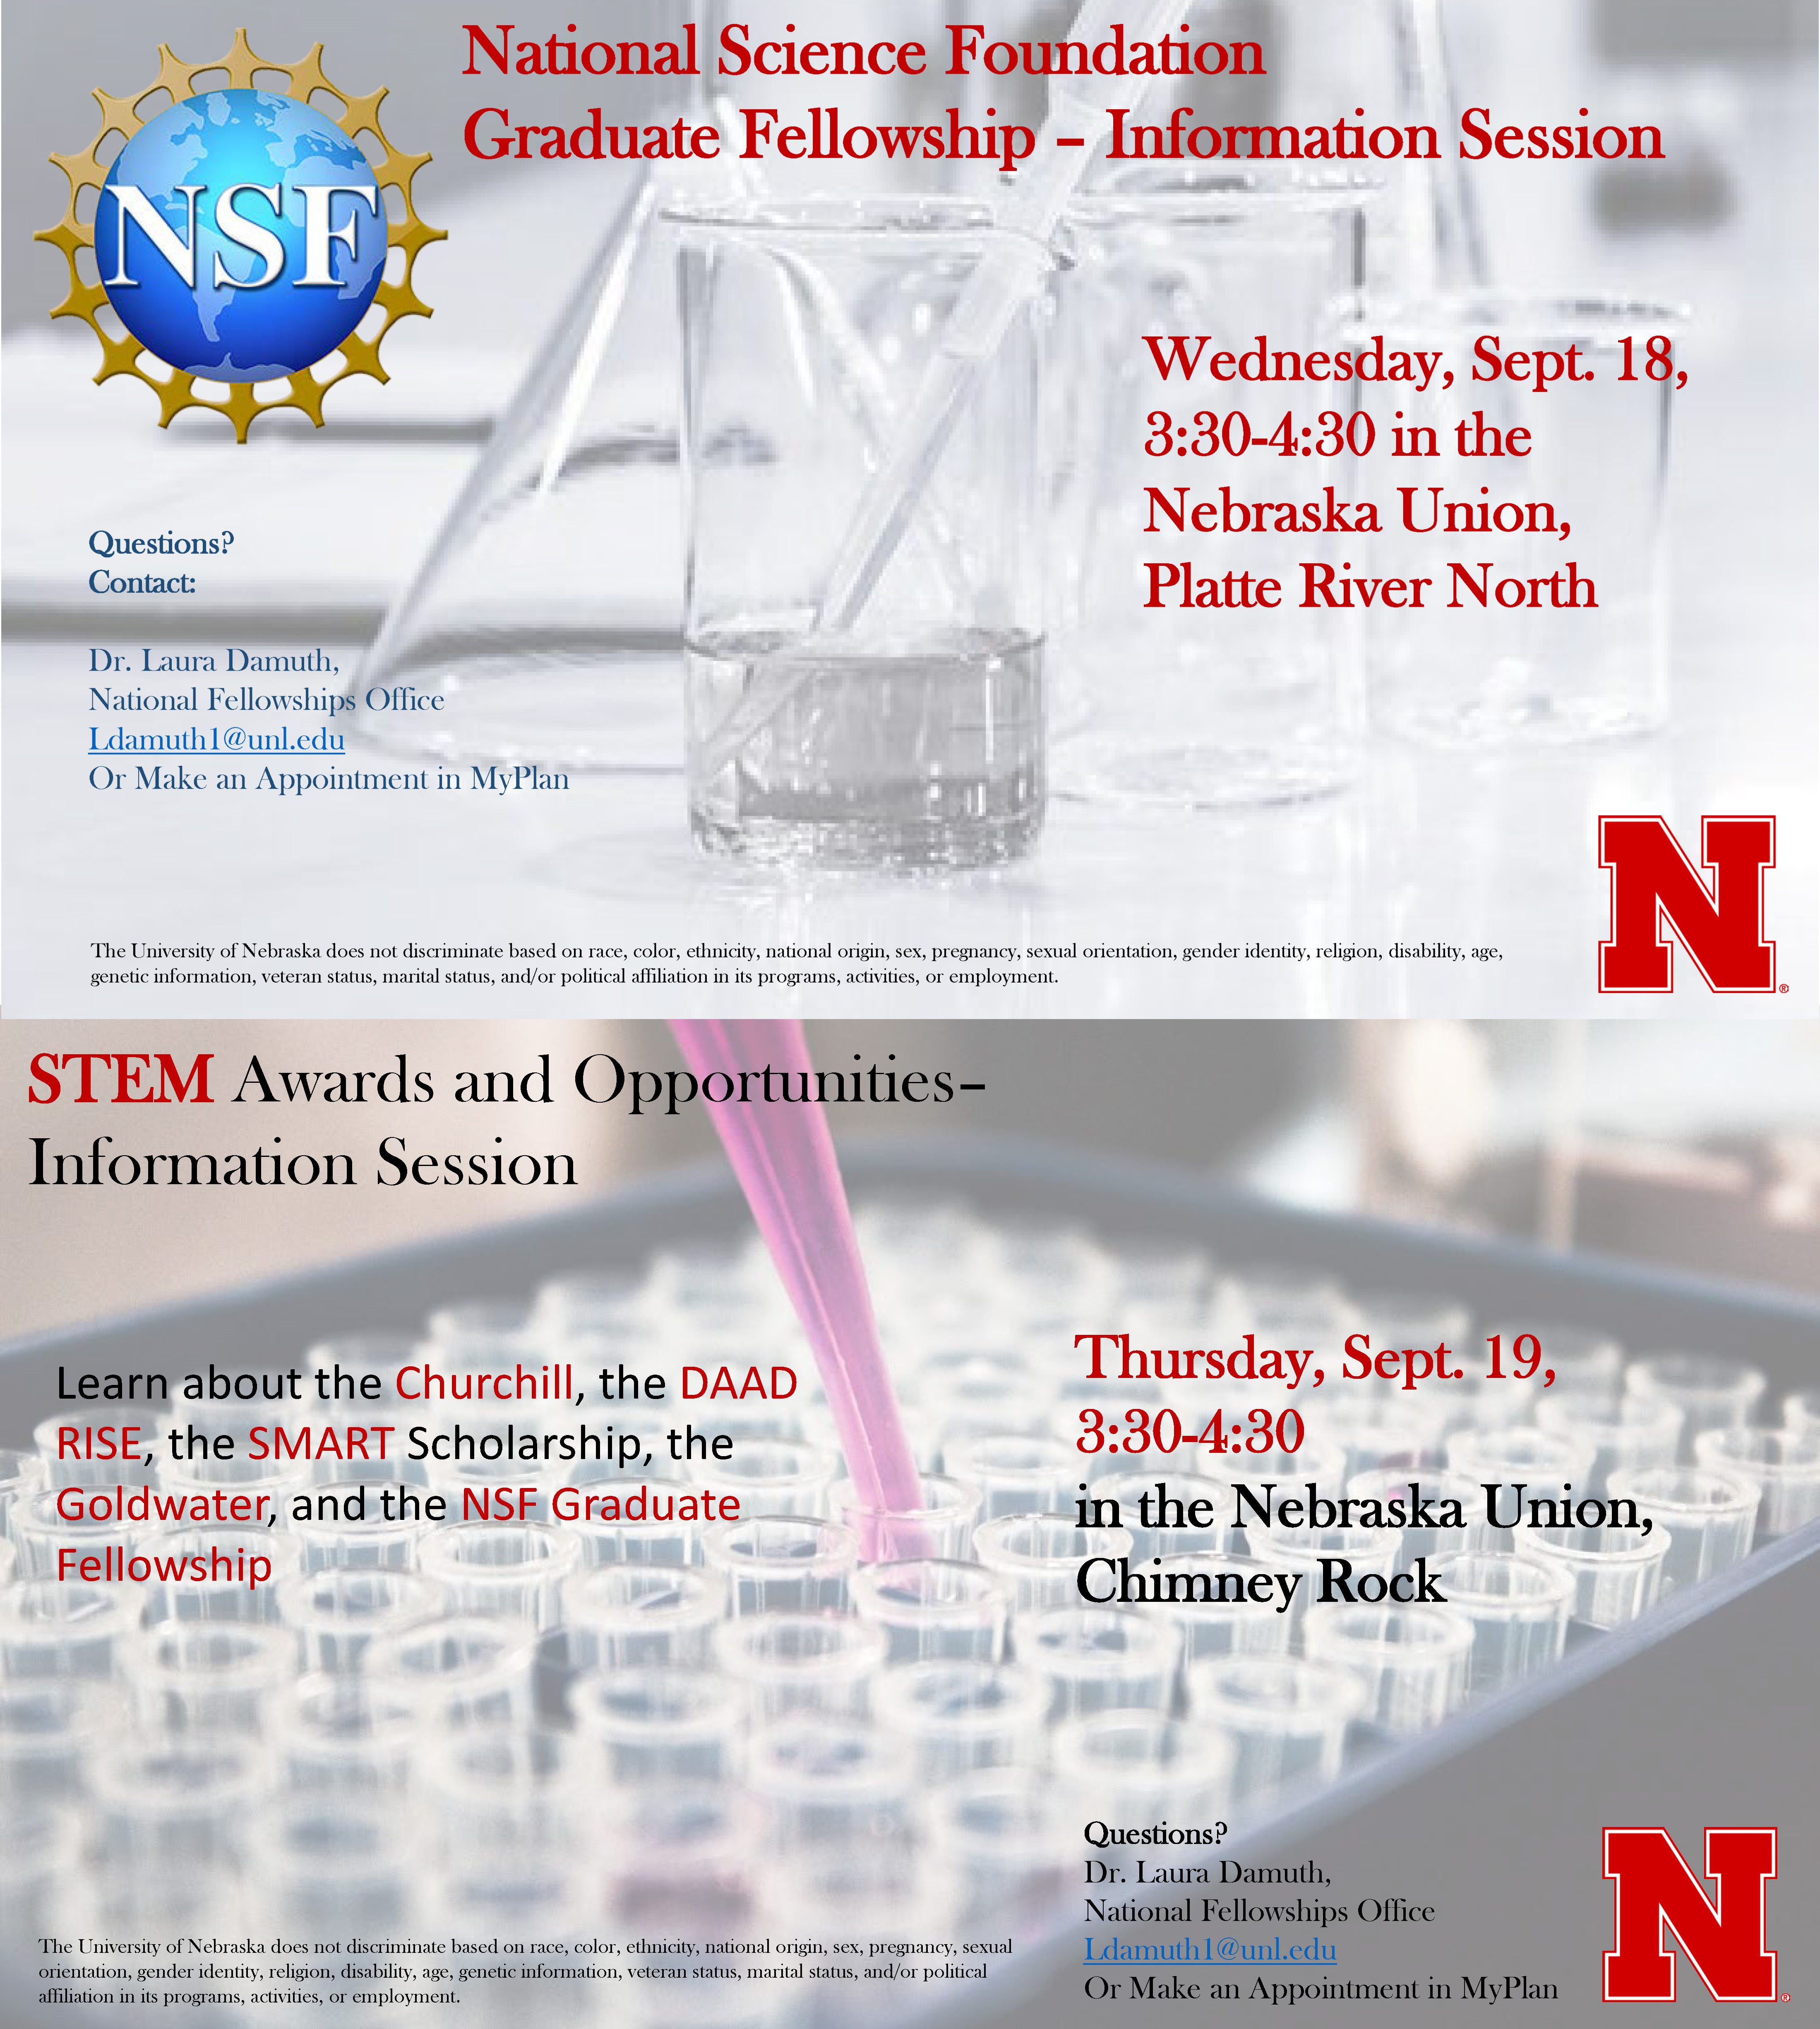 NSF Fellowship and other STEM Awards